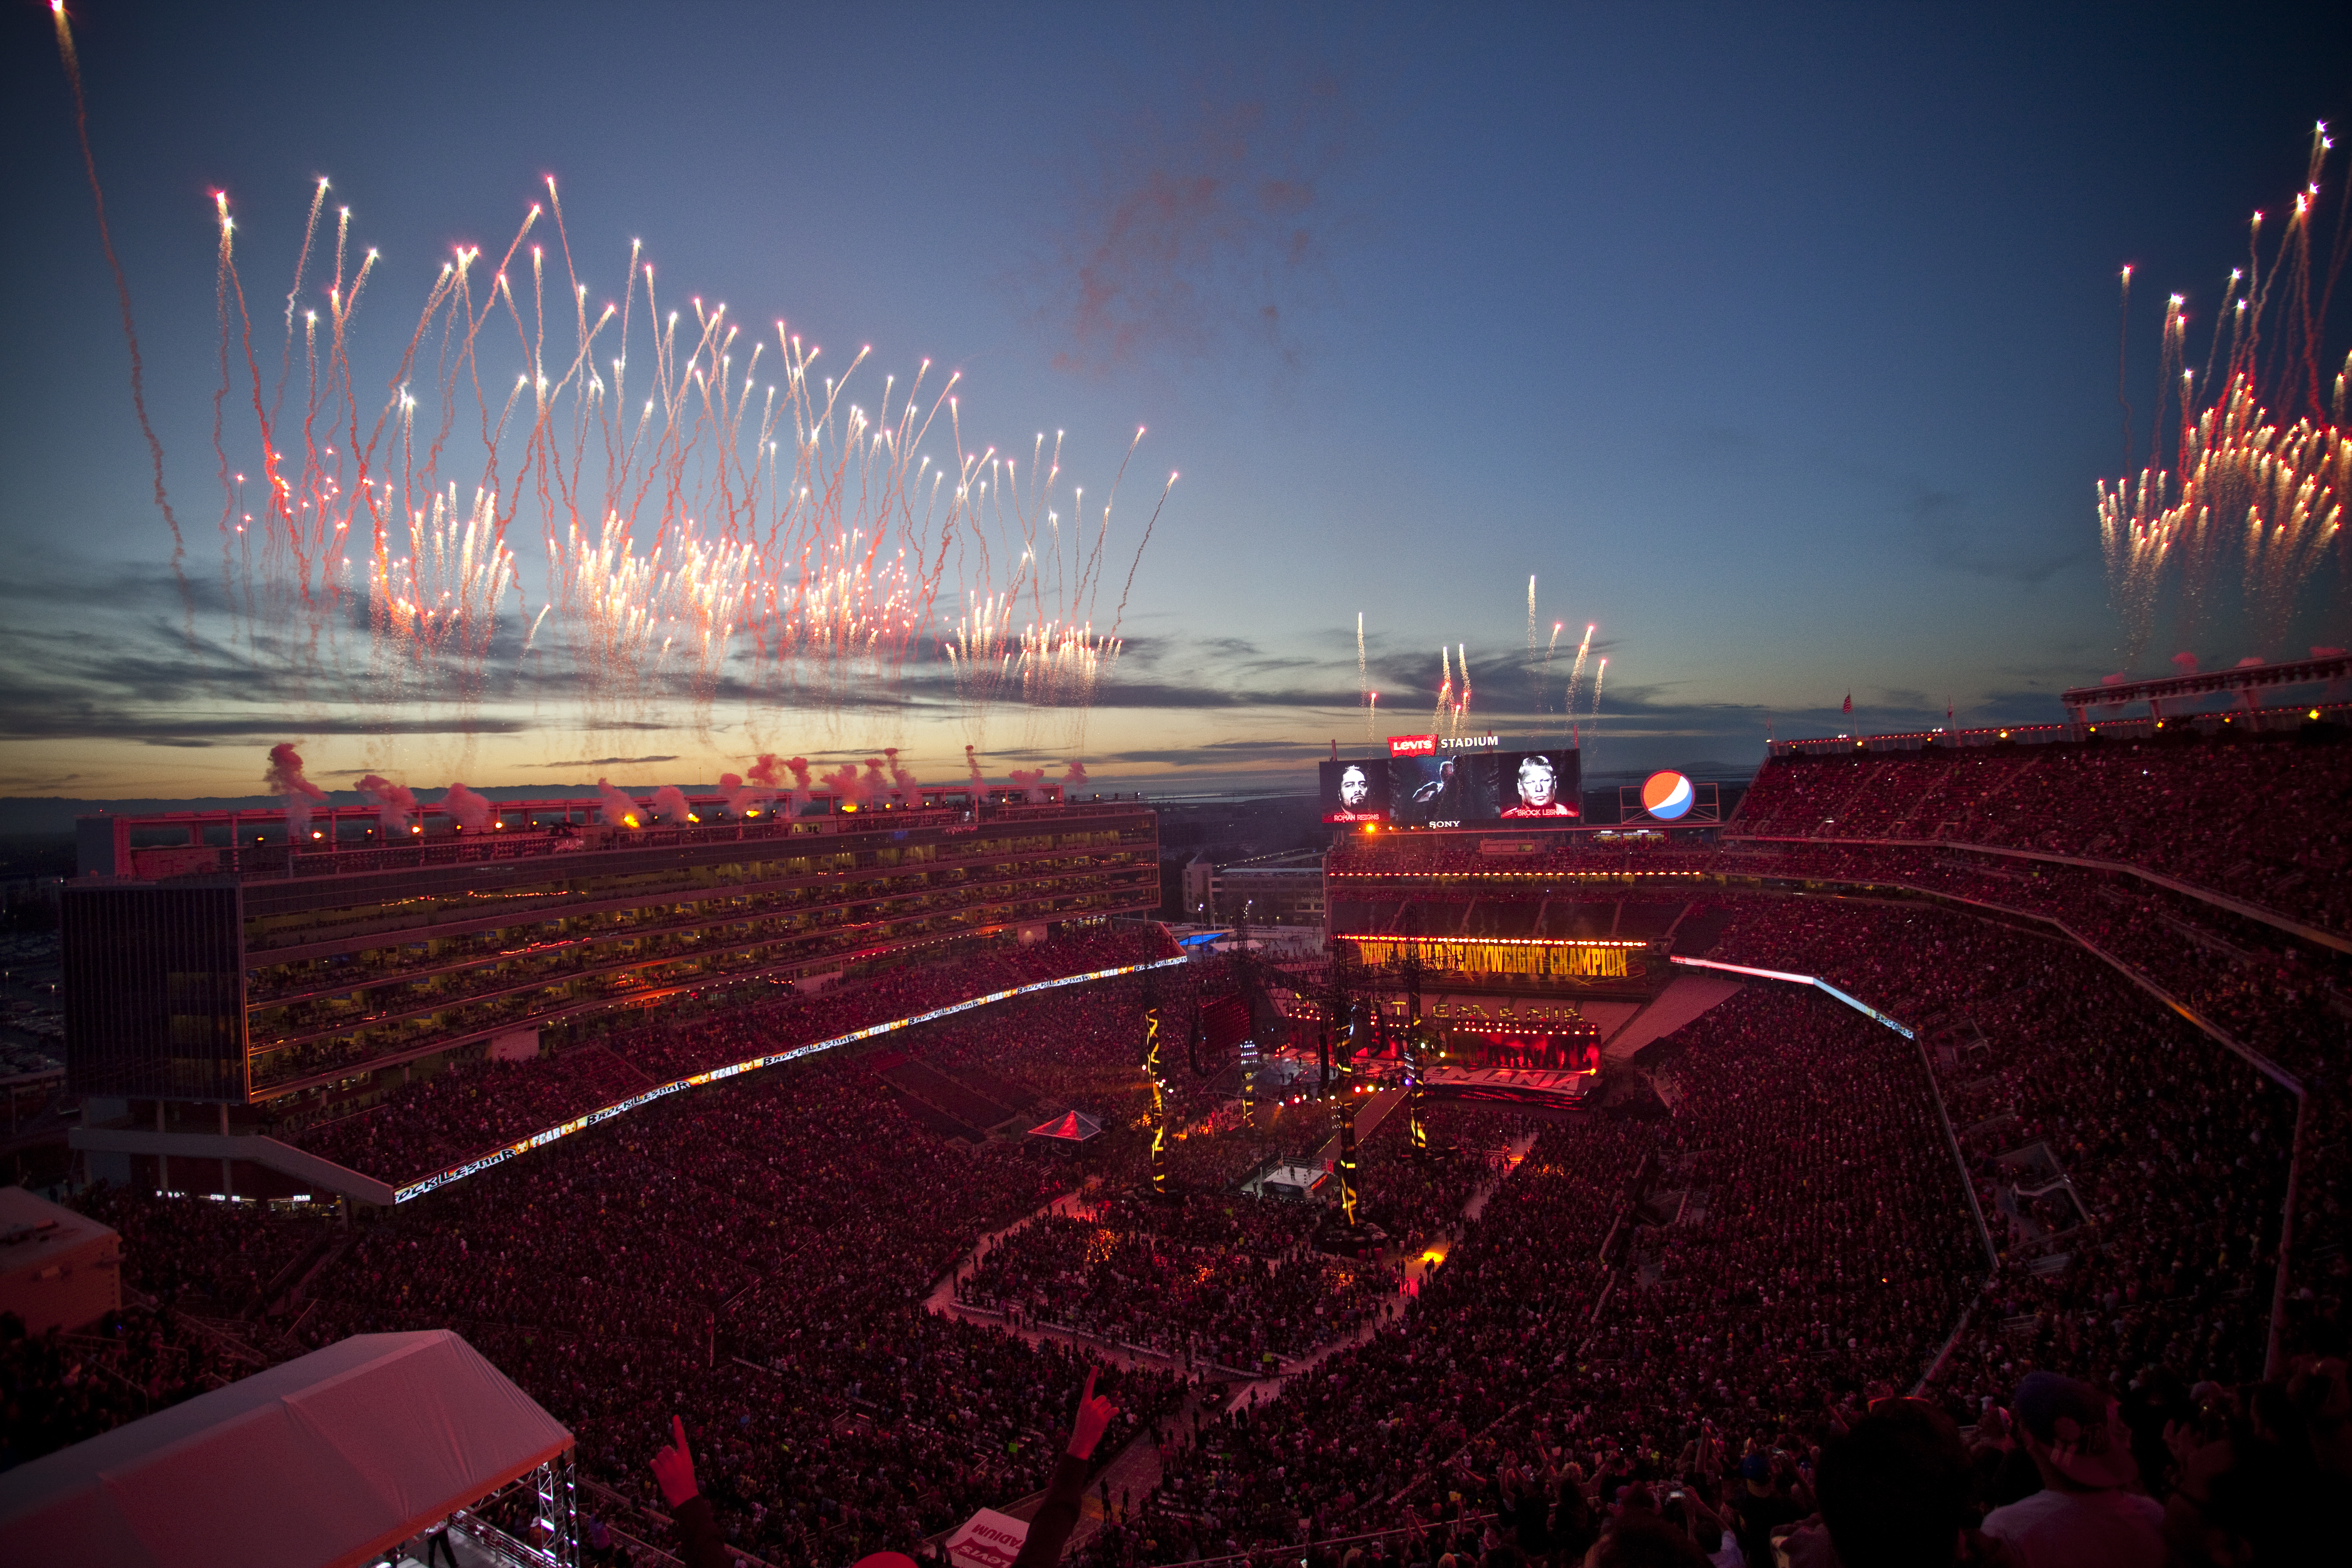 Zach Tarrant Shares the Awesome Joys of Photographing WrestleMania